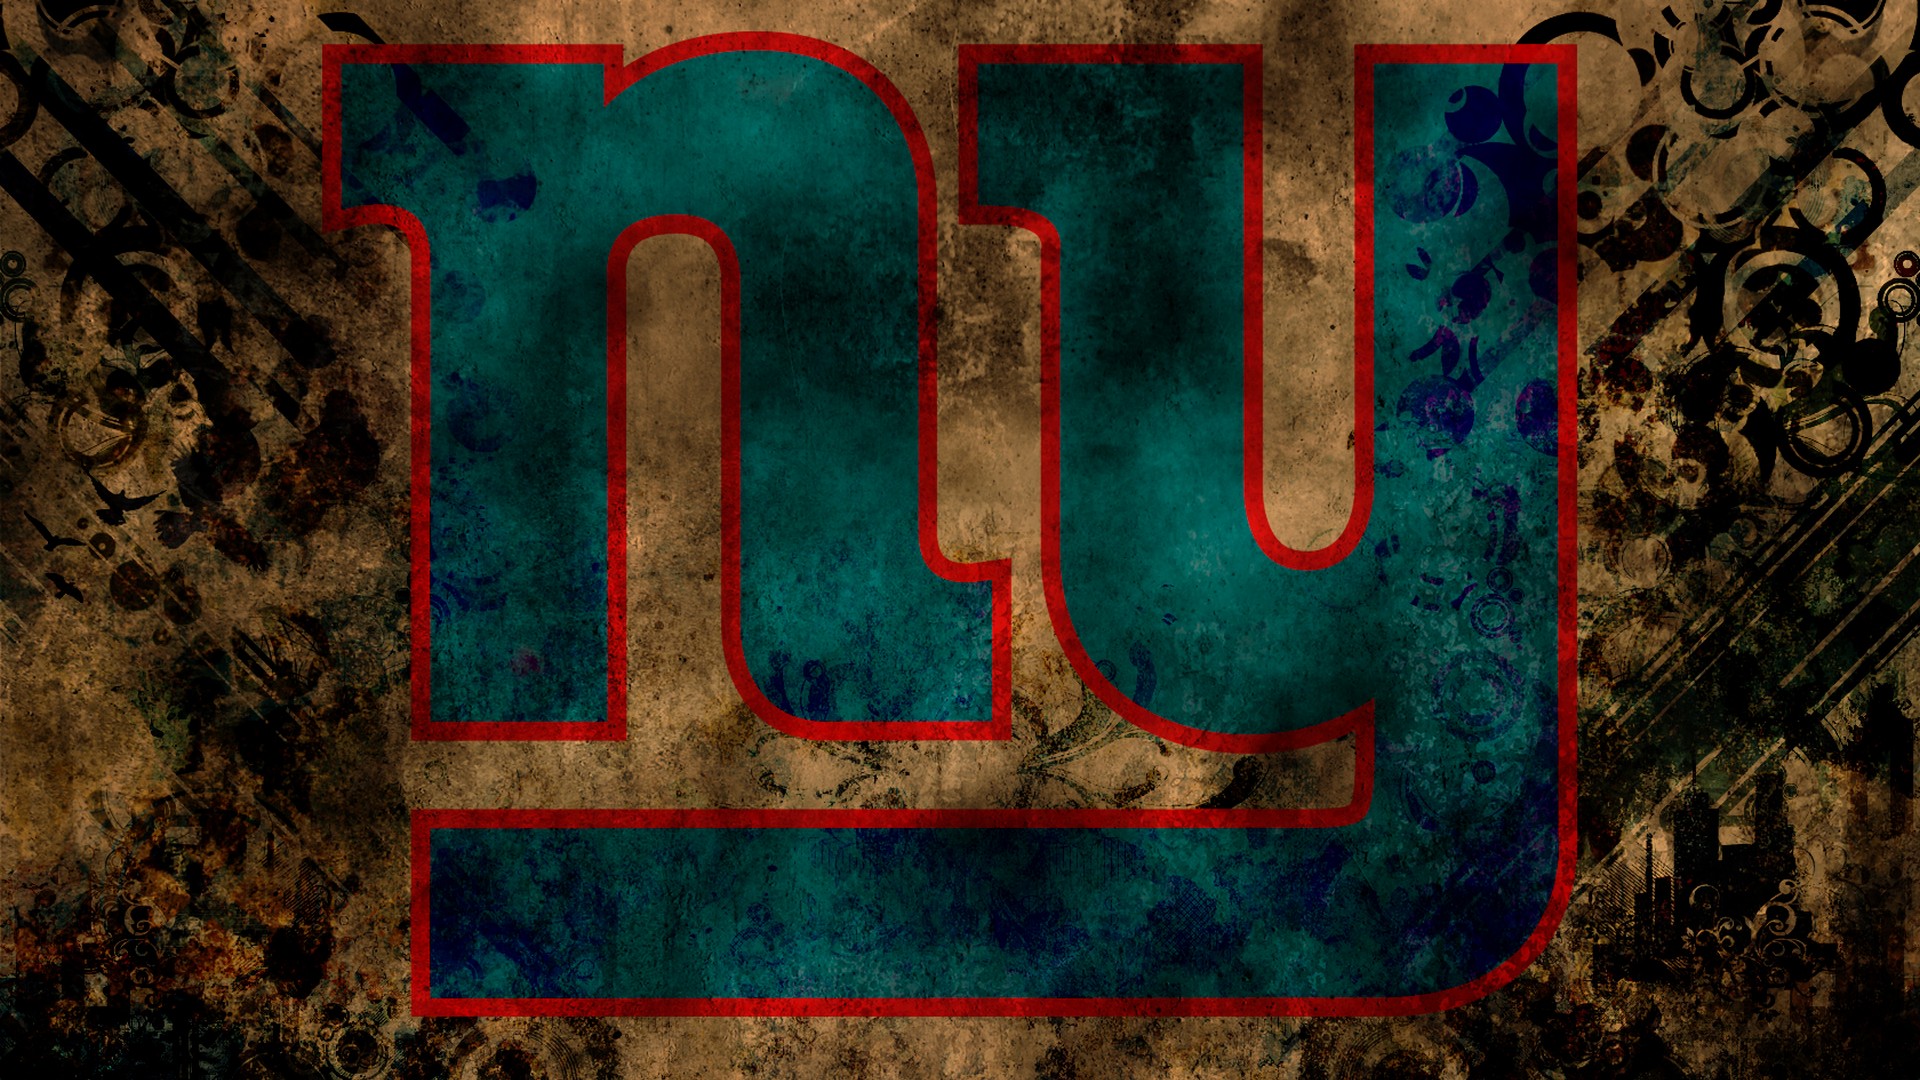 Windows Wallpaper New York Giants With high-resolution 1920X1080 pixel. You can use this wallpaper for your Mac or Windows Desktop Background, iPhone, Android or Tablet and another Smartphone device